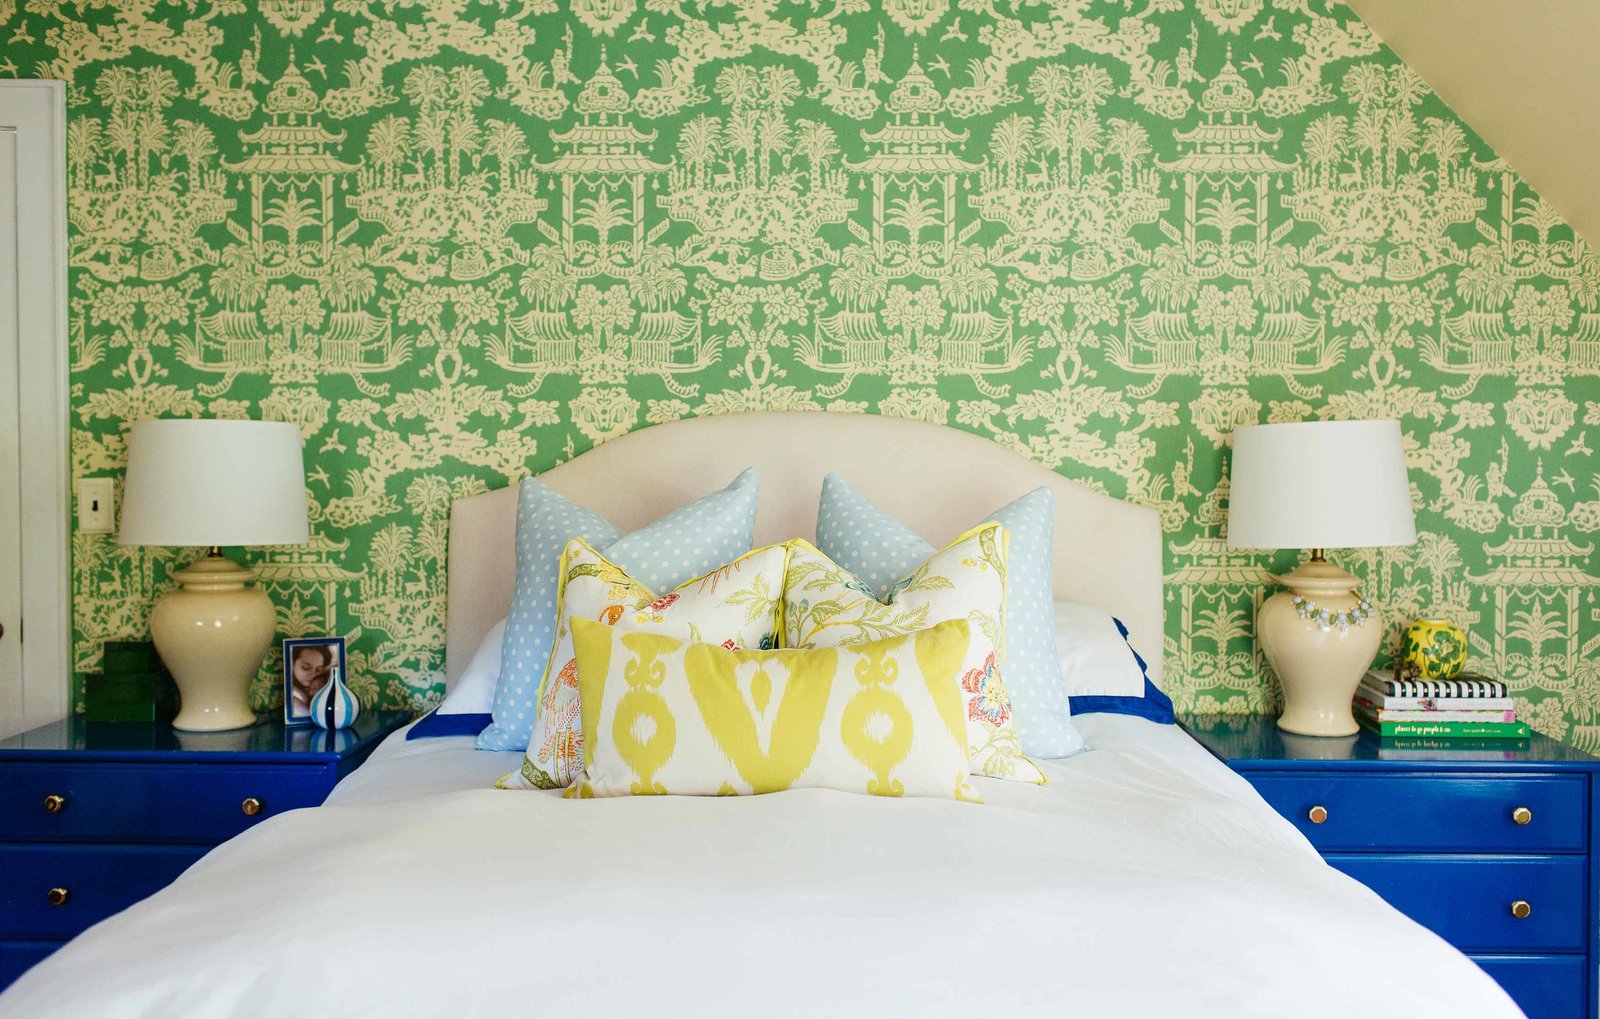 A white bed and blue end tables in front of a green wall papered wall.